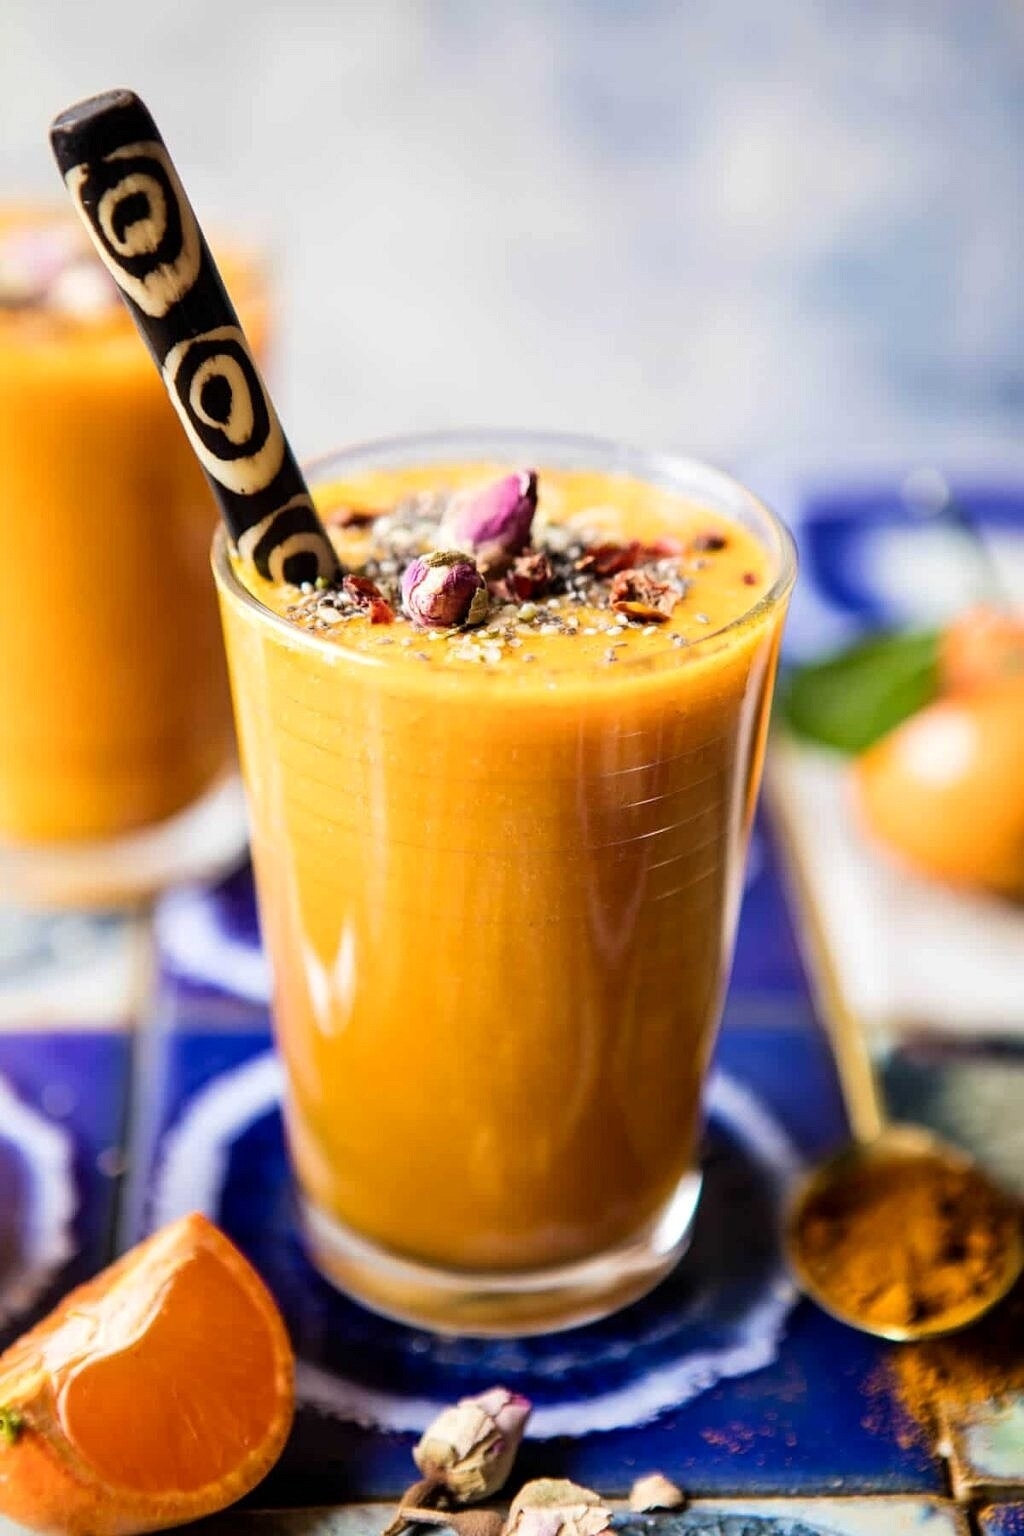 A glass of smoothie garnished with nuts and seeds, with a patterned straw, accompanied by fresh ingredients and a spoon of spices